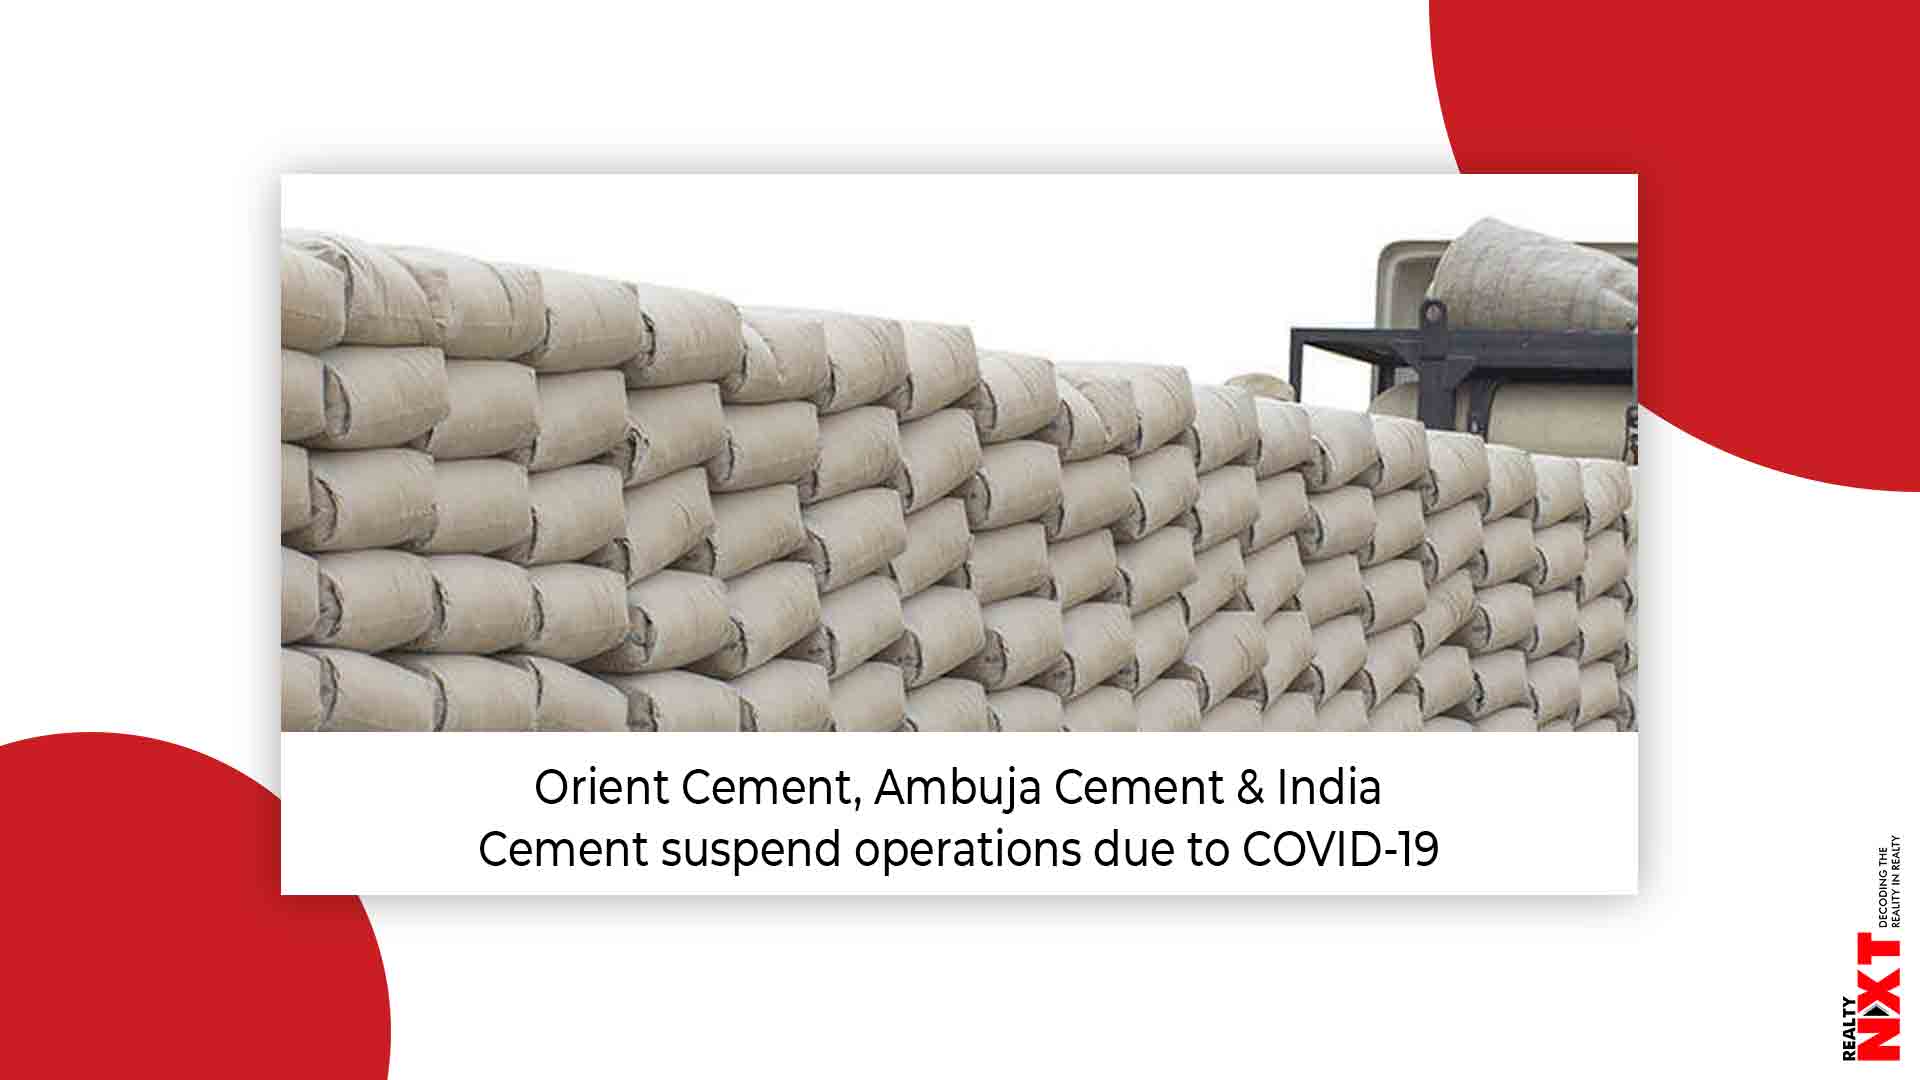 Indian Cement industry players have closed down operations